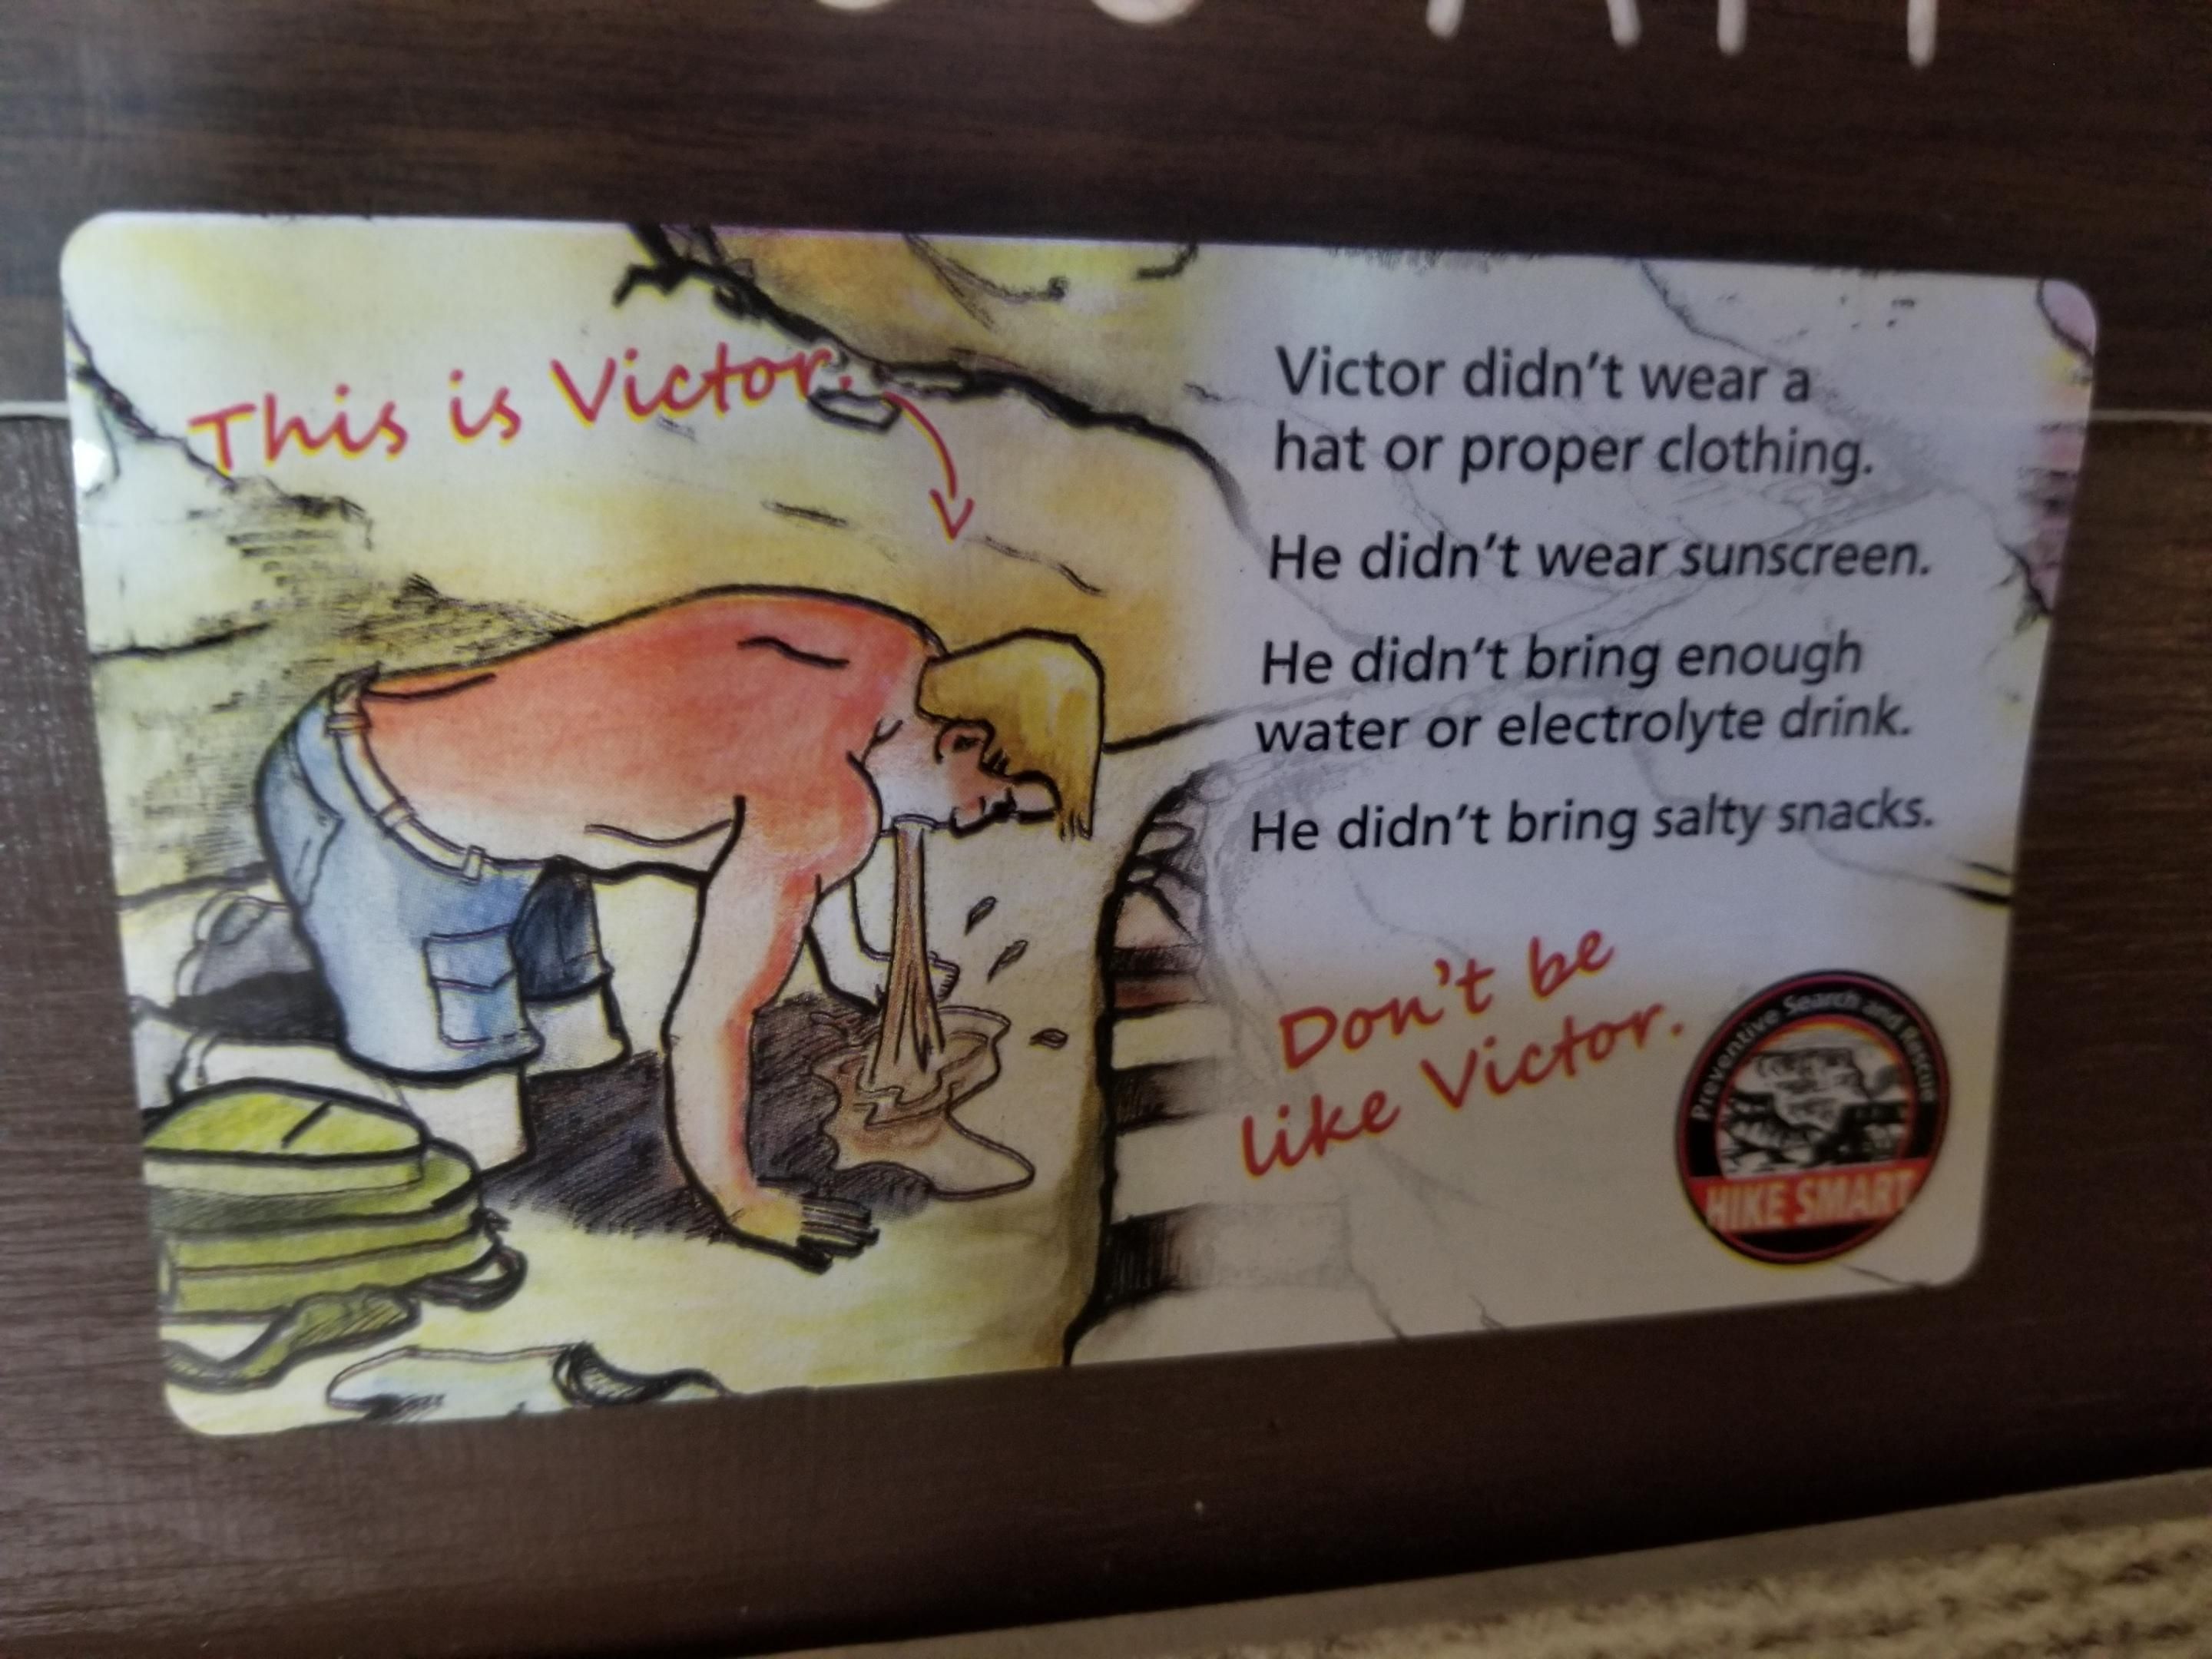 Don't be like Victor.